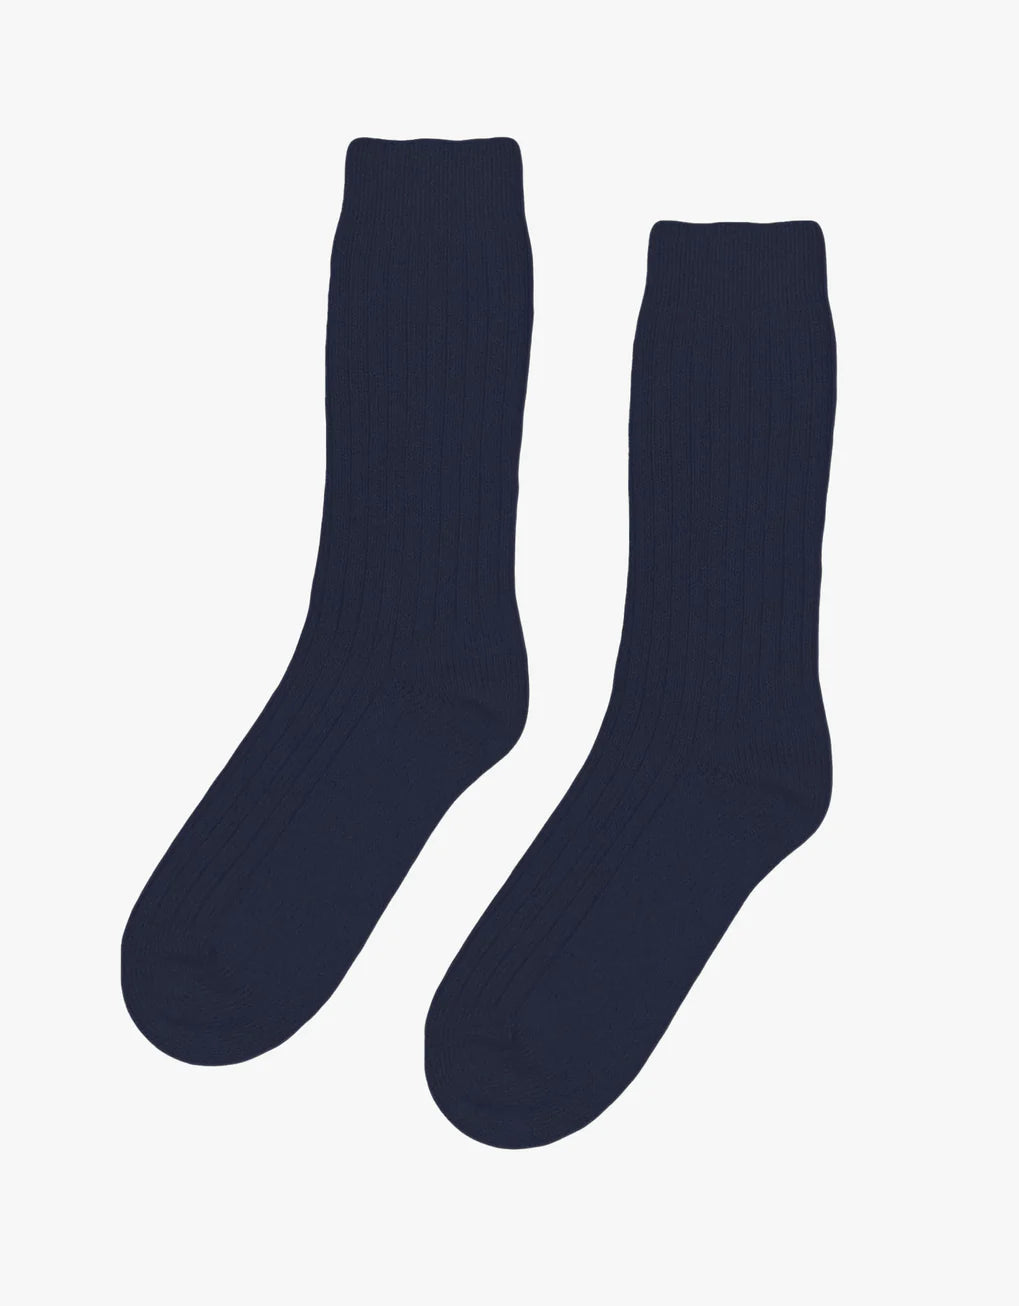 A pair of Colorful Standard Merino Wool Blend Socks on a white background made from recycled fibres.